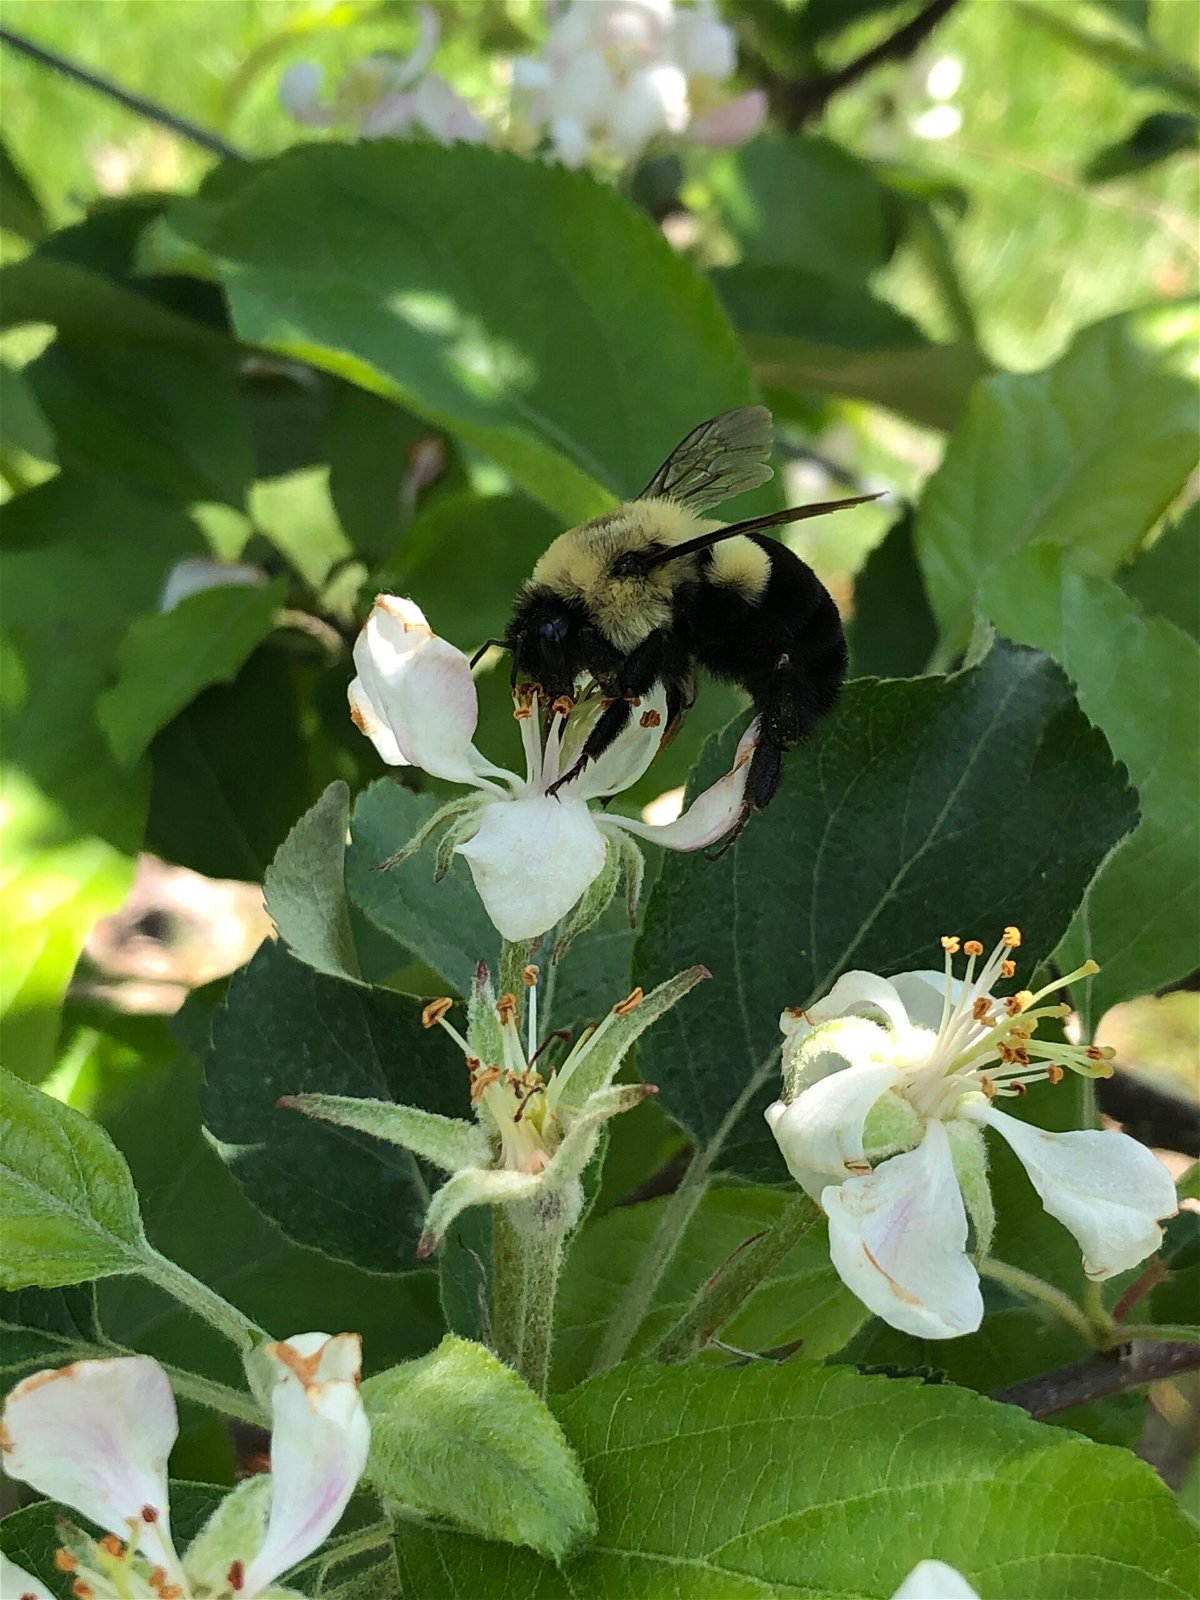 <i>Nigel Raine via CNN Newsource</i><br/>A common eastern bumblebee queen is pictured on an apple blossom.